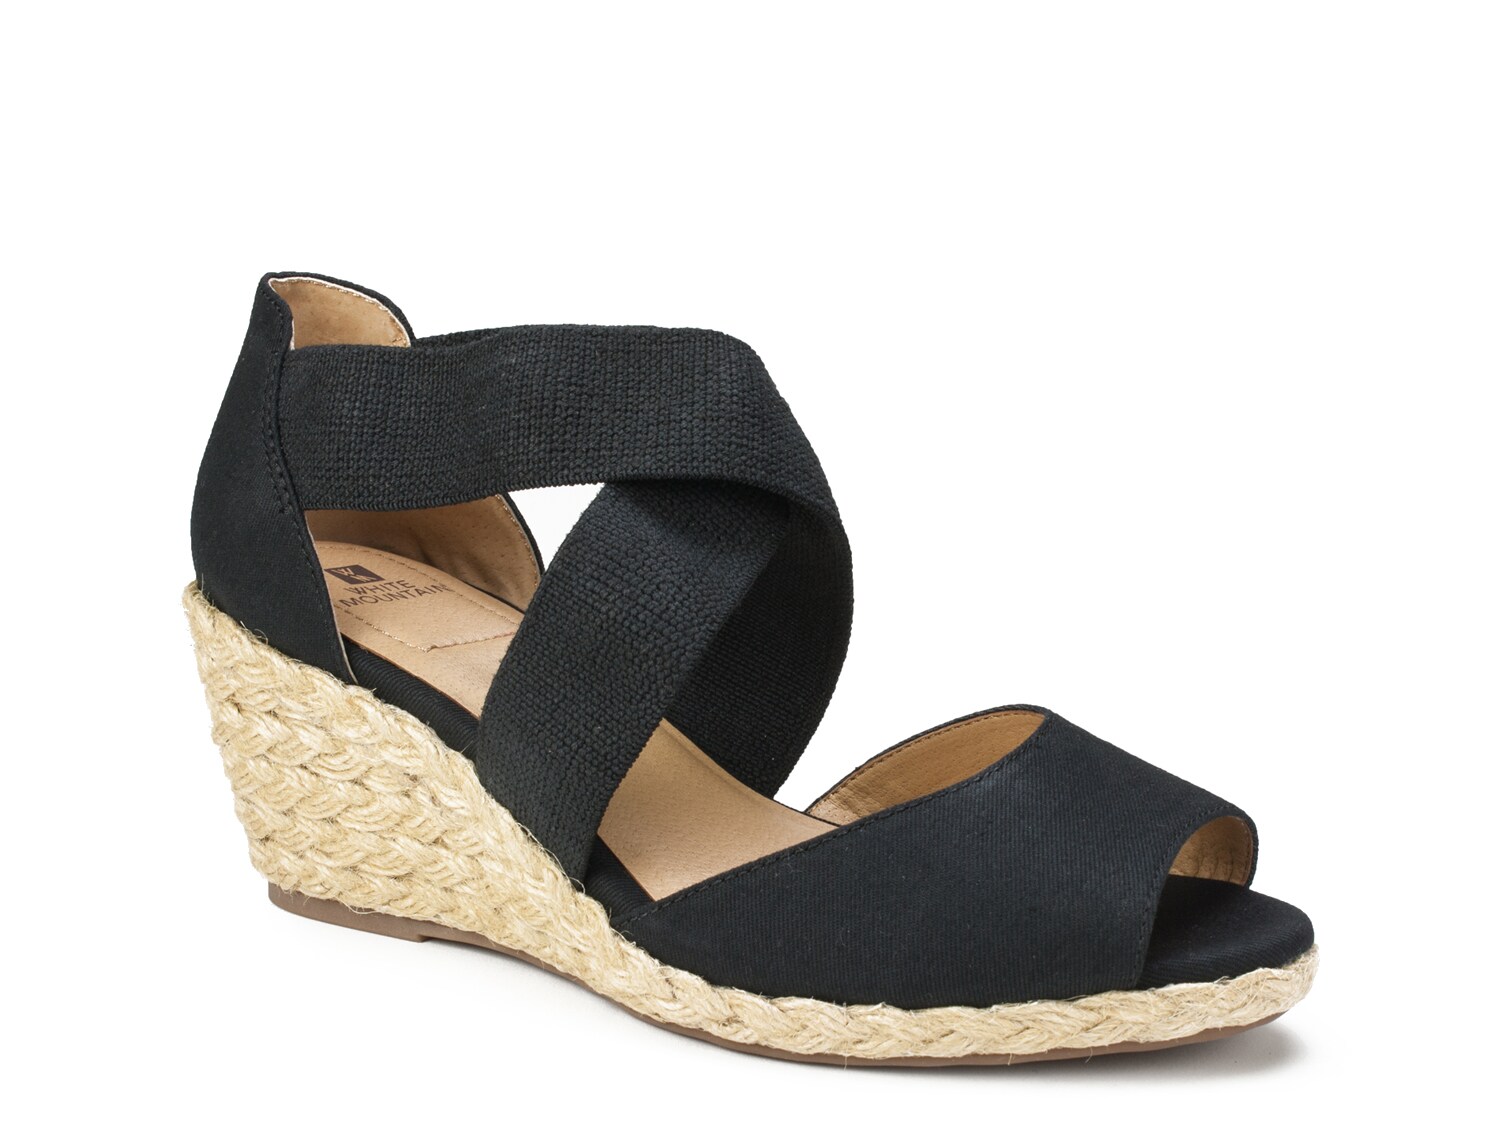 Black and white sandals | DSW